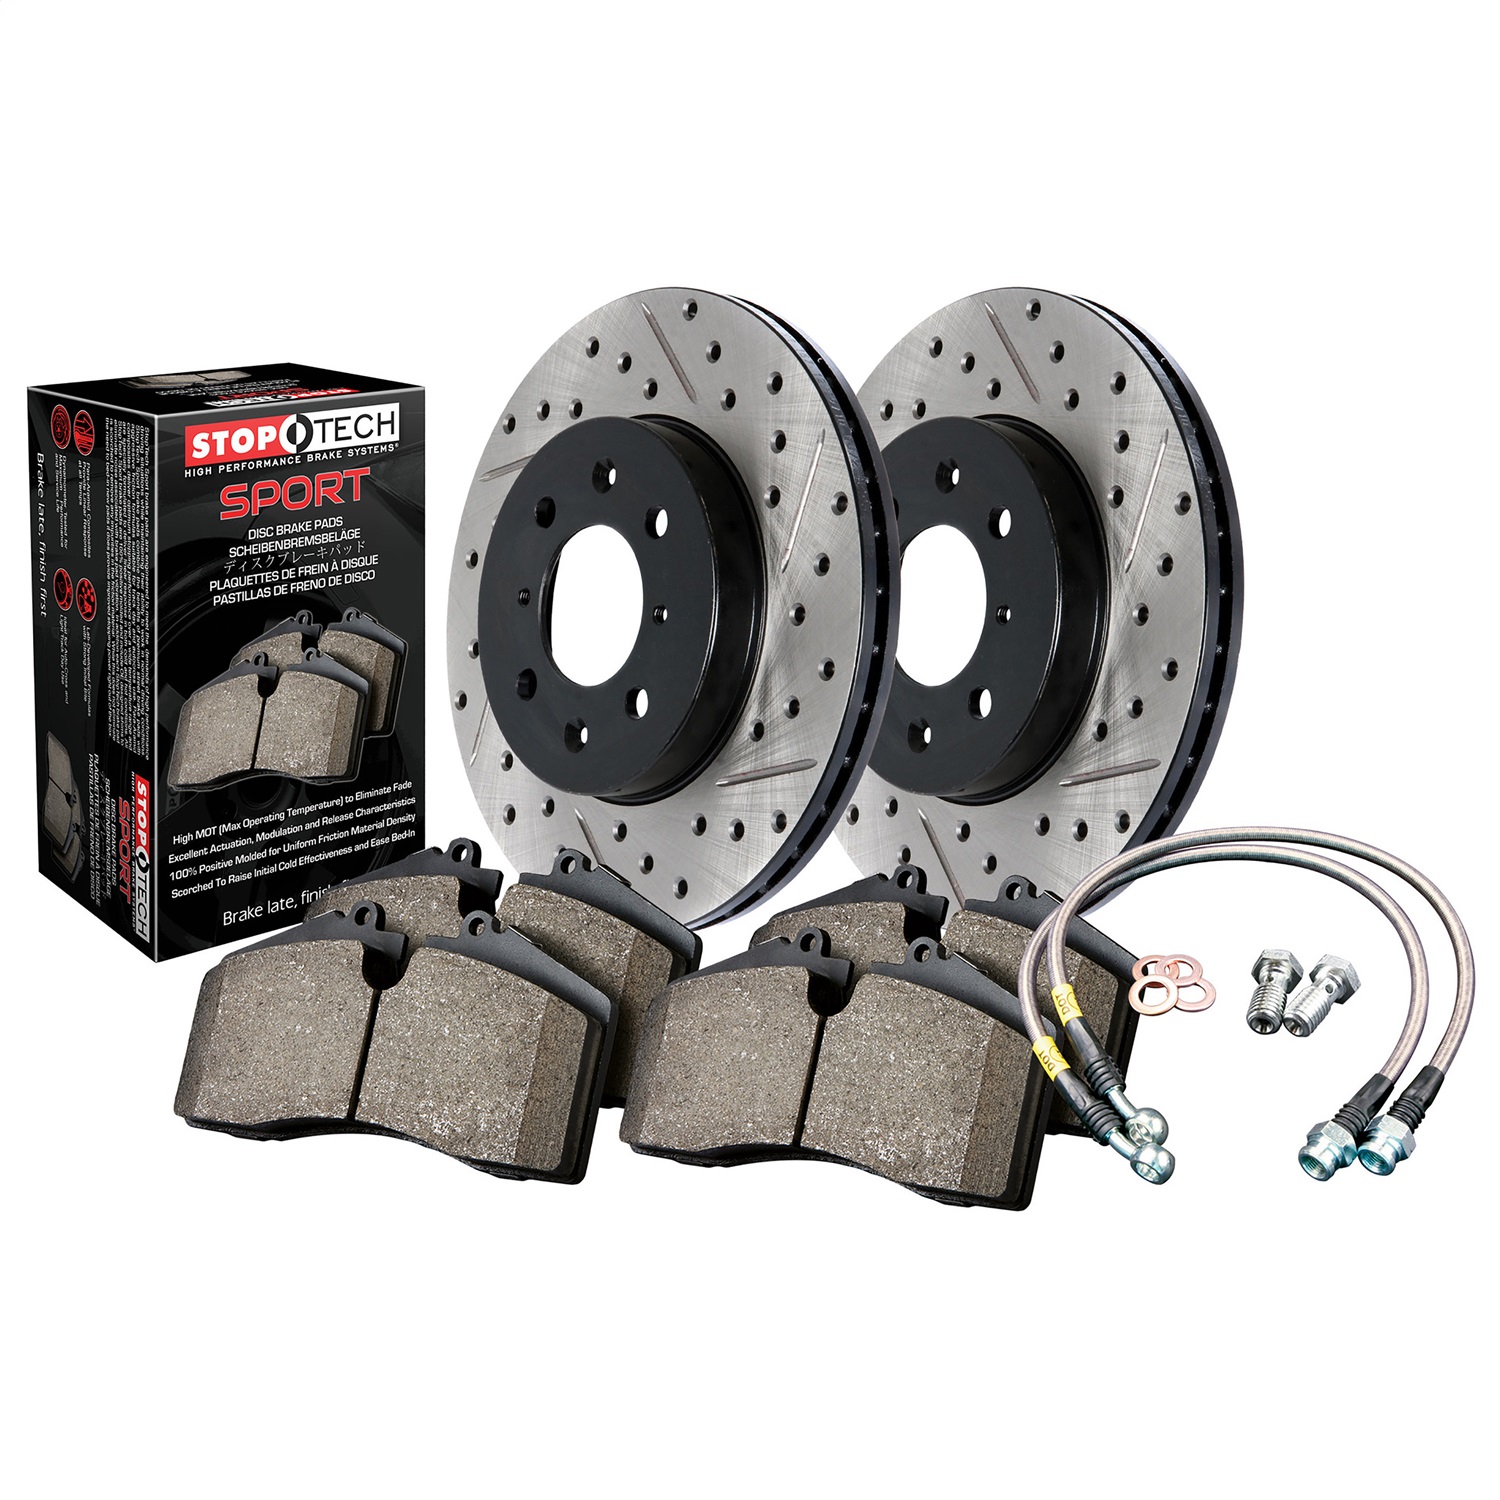 StopTech 978.44001F Sport Disc Brake Kit w/Cross-Drilled And Slotted Rotors